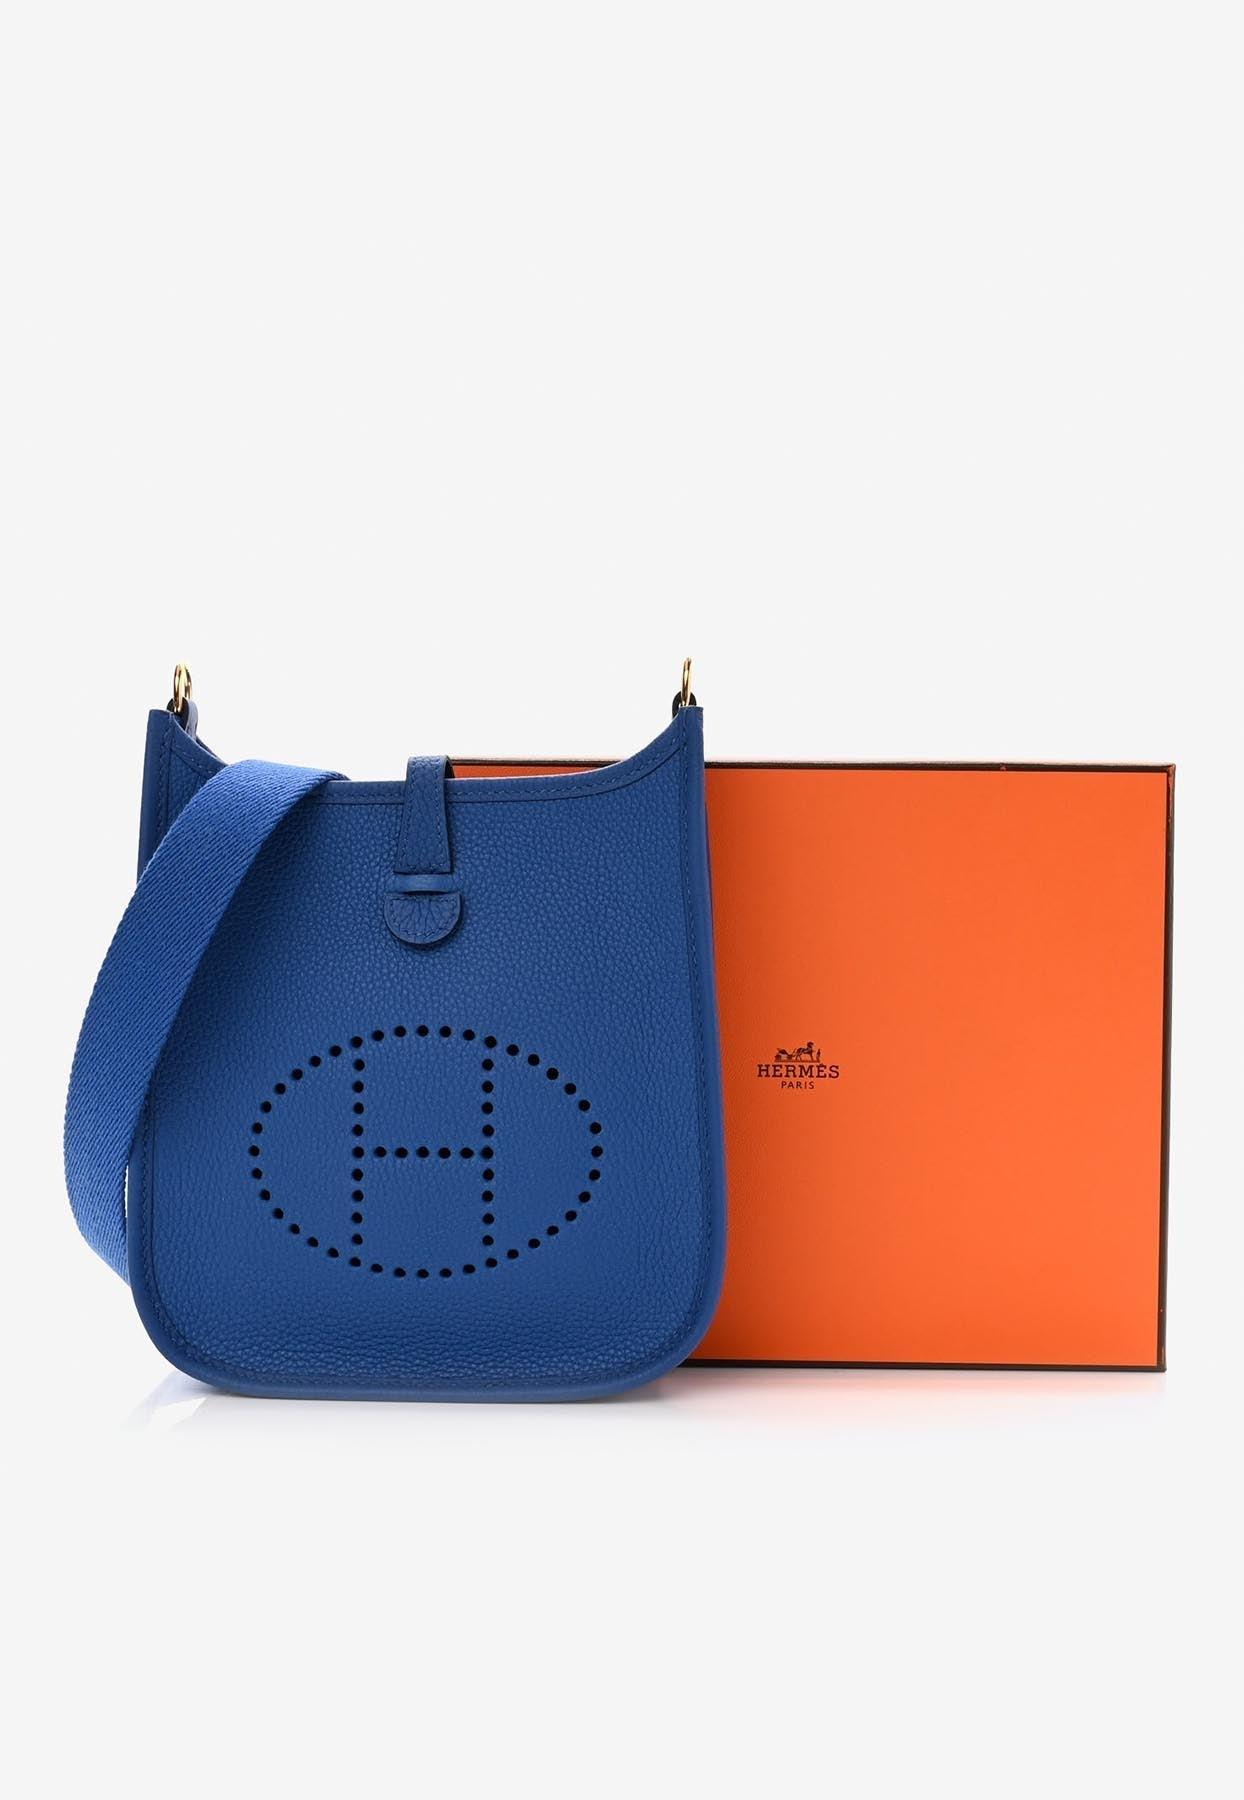 Hermès Evelyne Tpm In Bleu France Taurillon Maurice With Gold